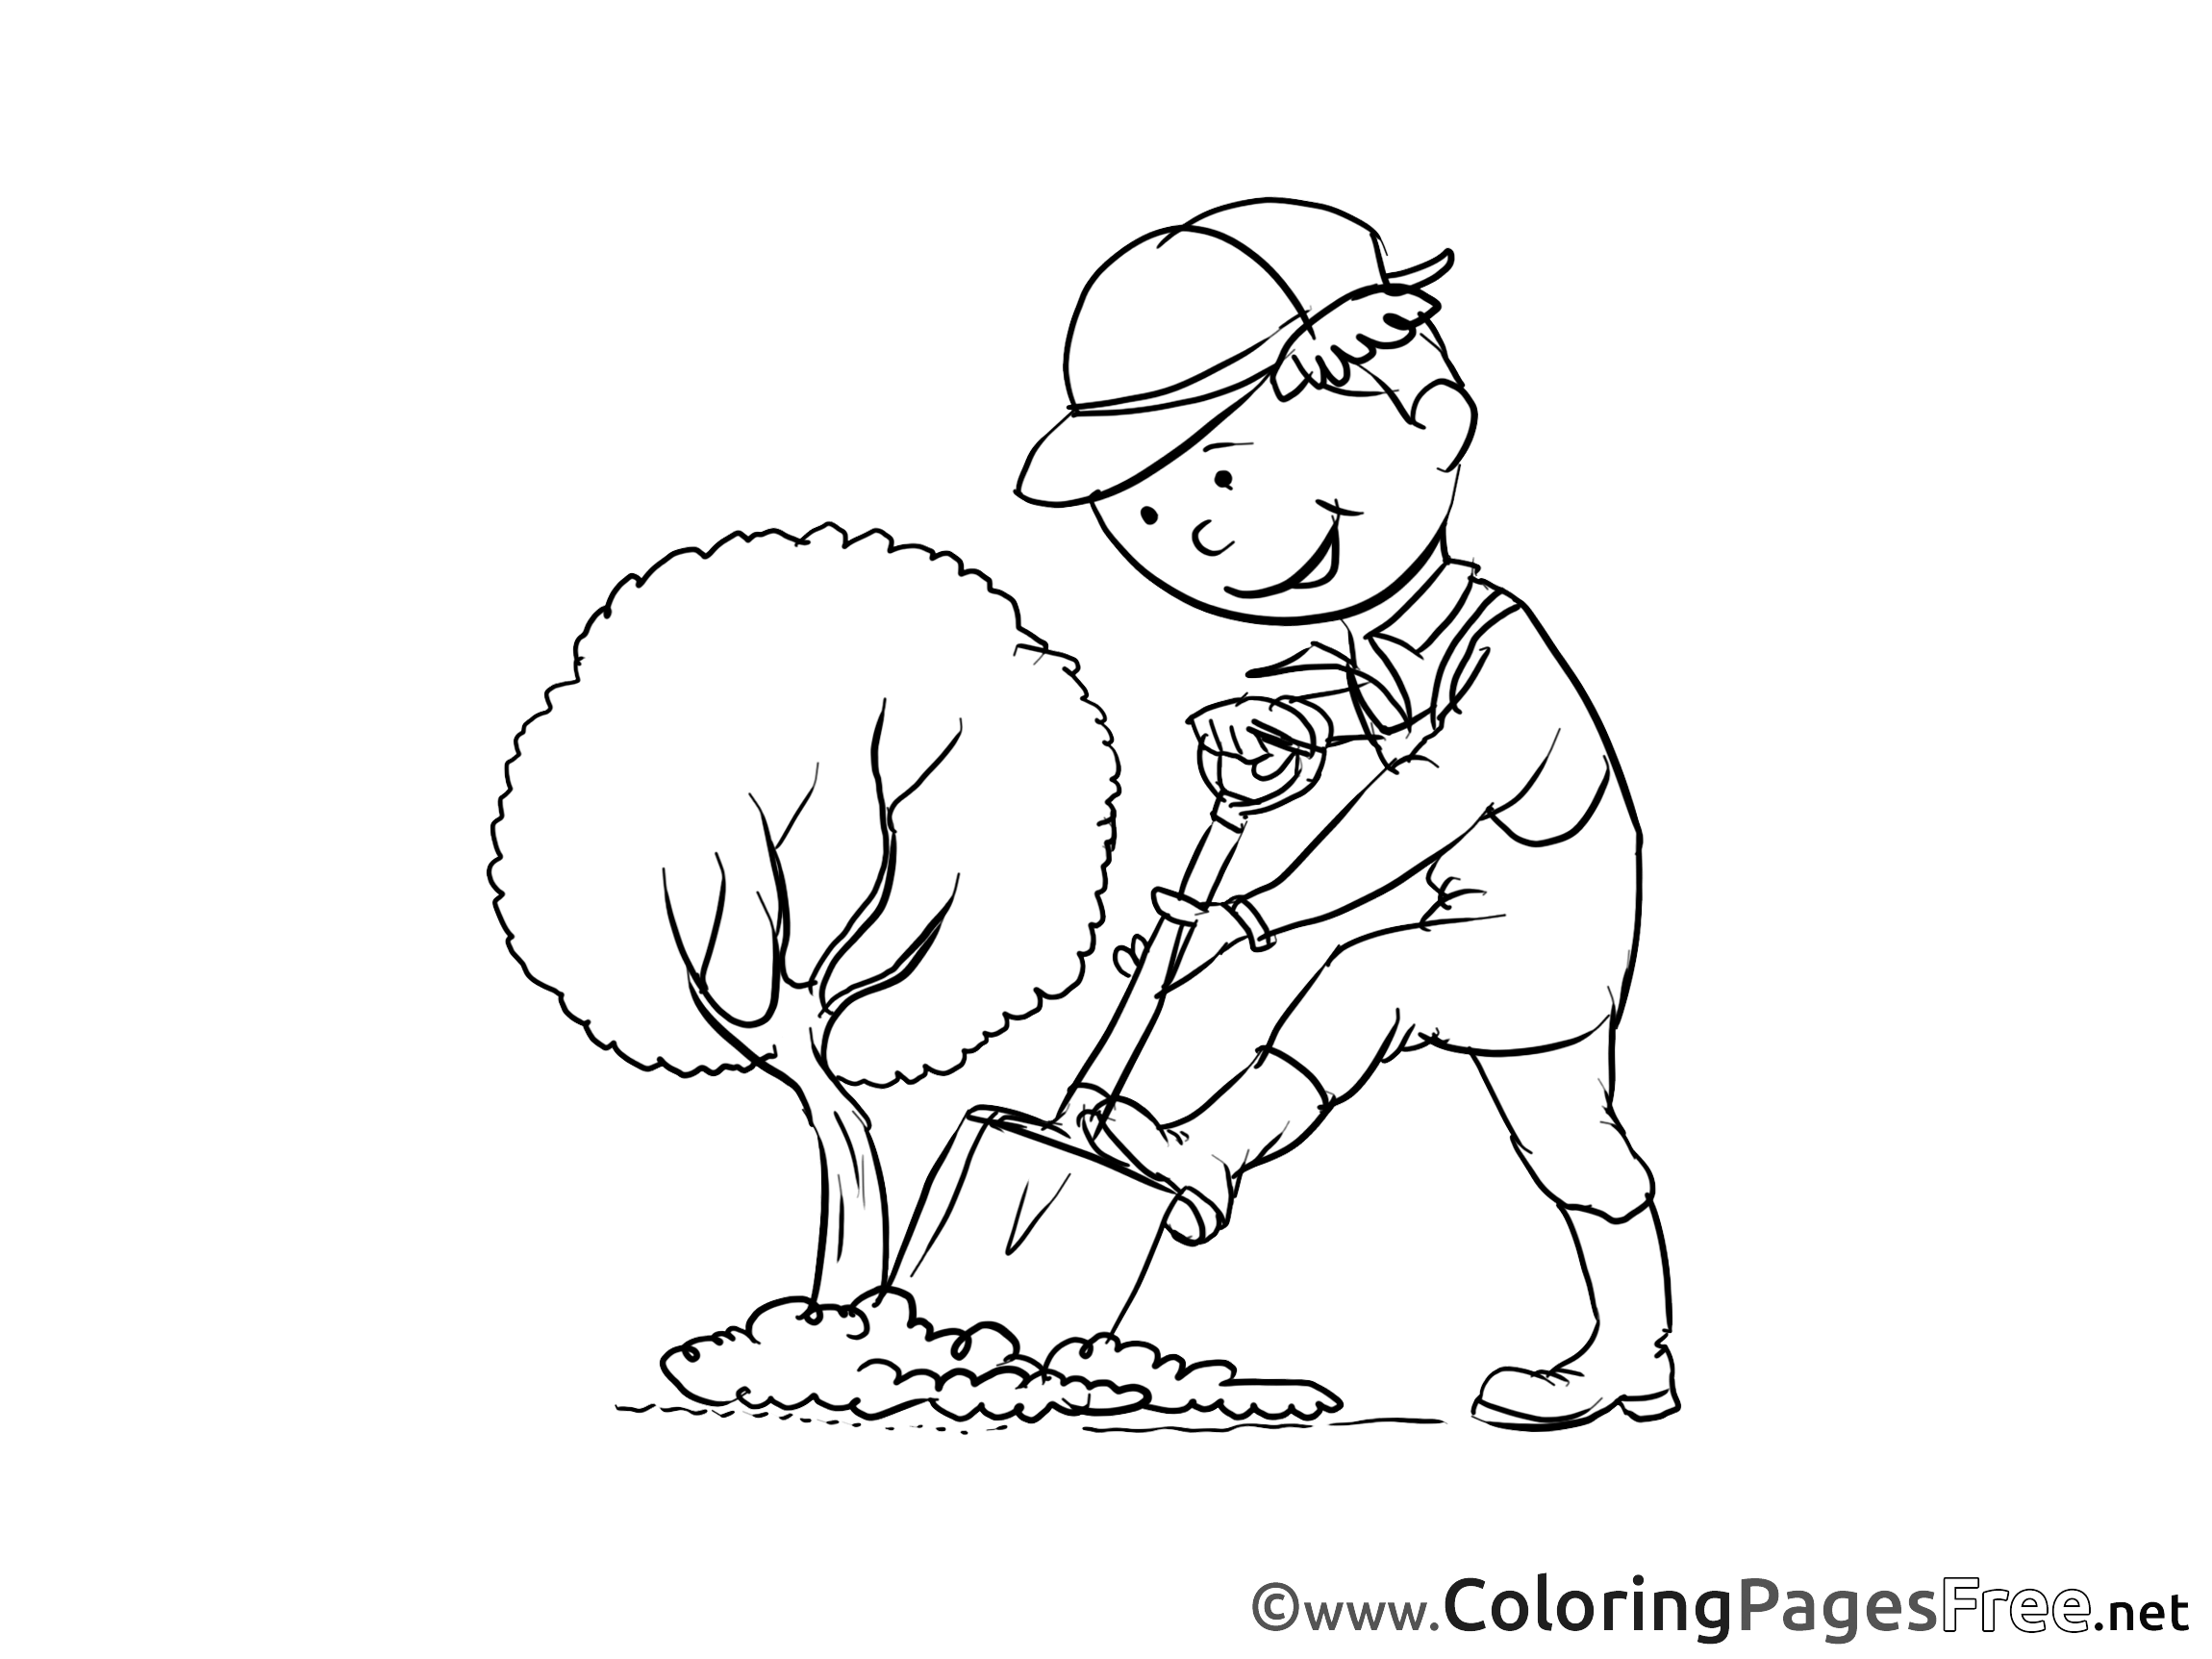 Download Gardener Coloring Pages for free